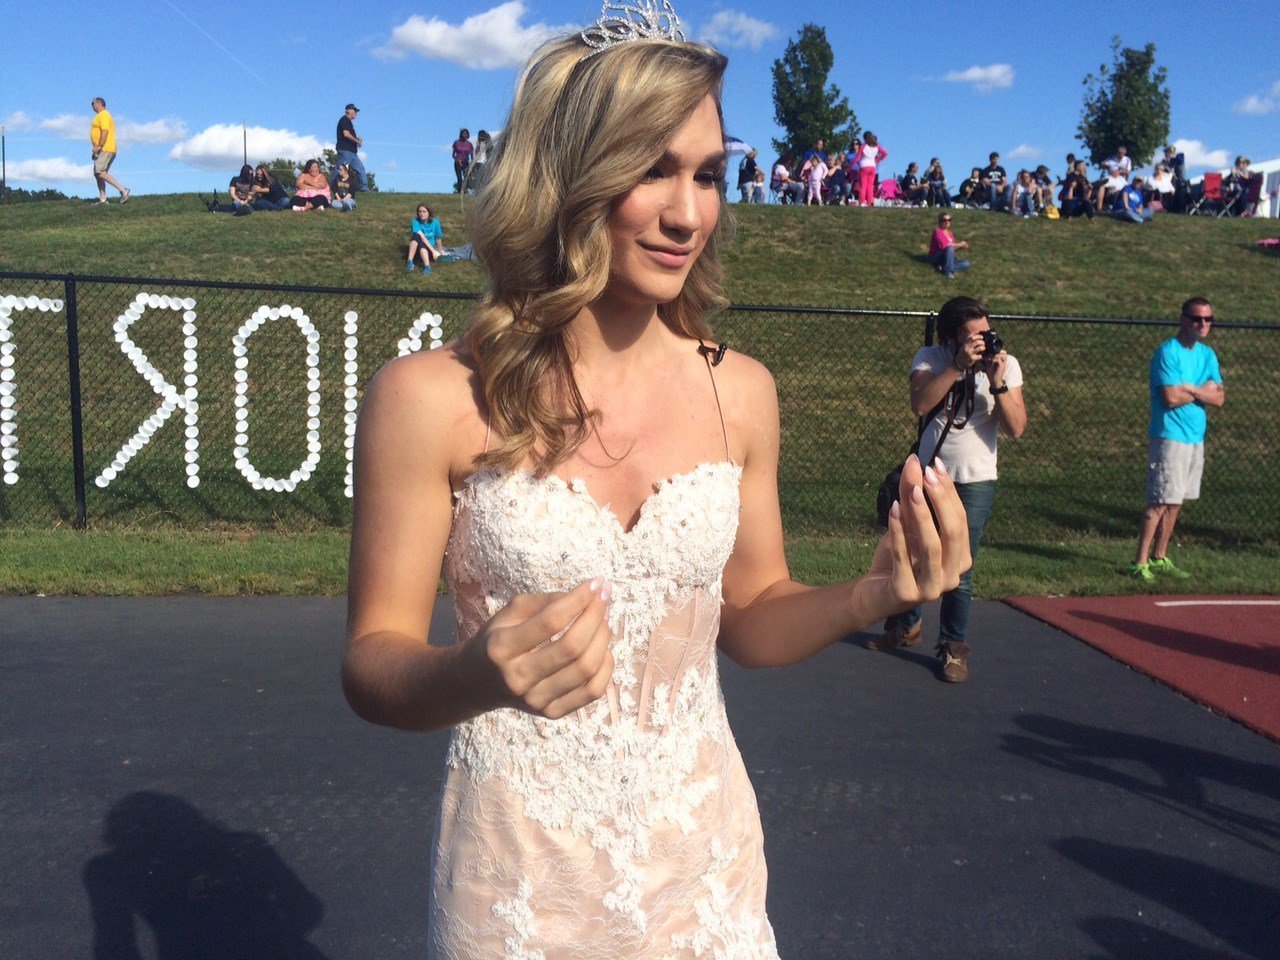 This Transgender Teen Won Hearts and the Prom Queen Title with Her Spunk an...